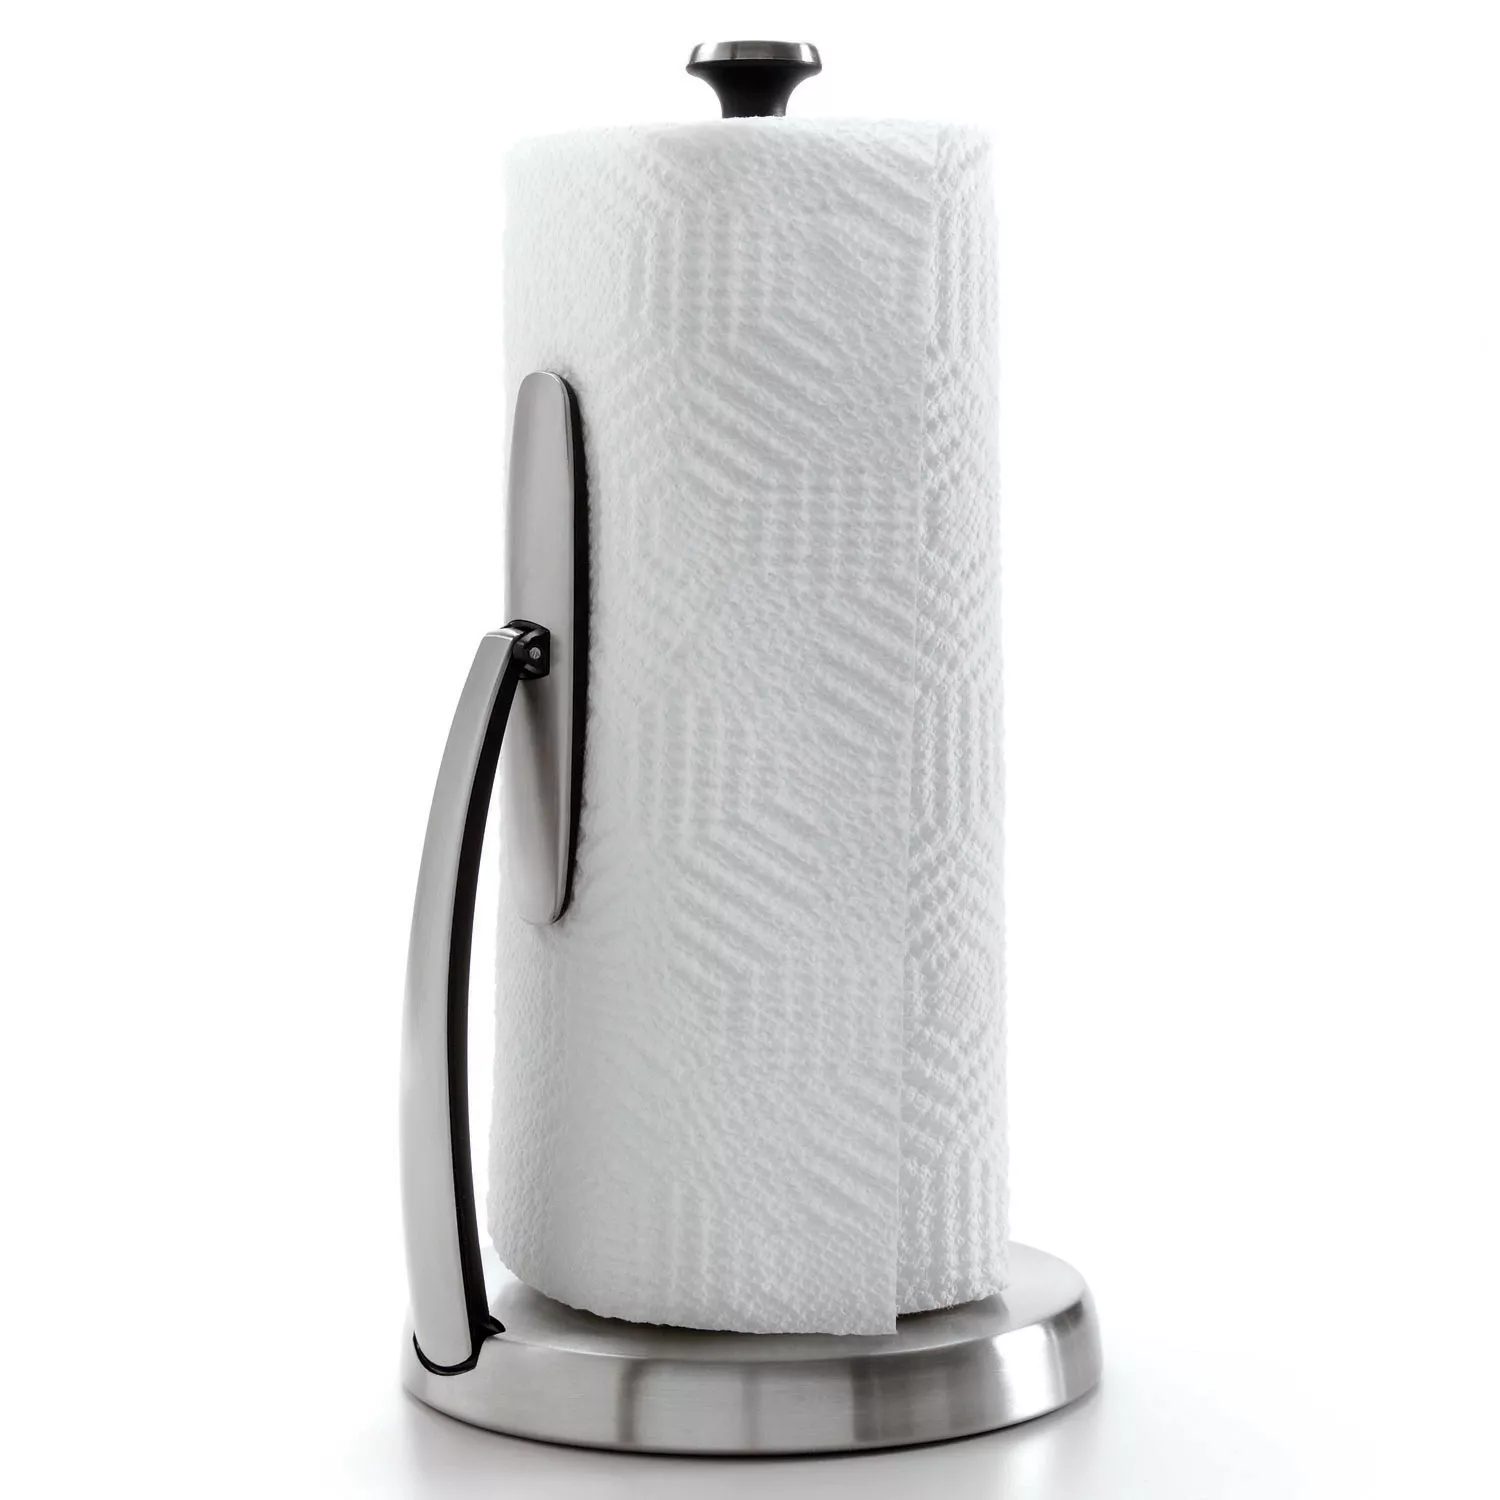 Oxo, Kitchen, Oxo Stainless Steel Metal Paper Towel Holder